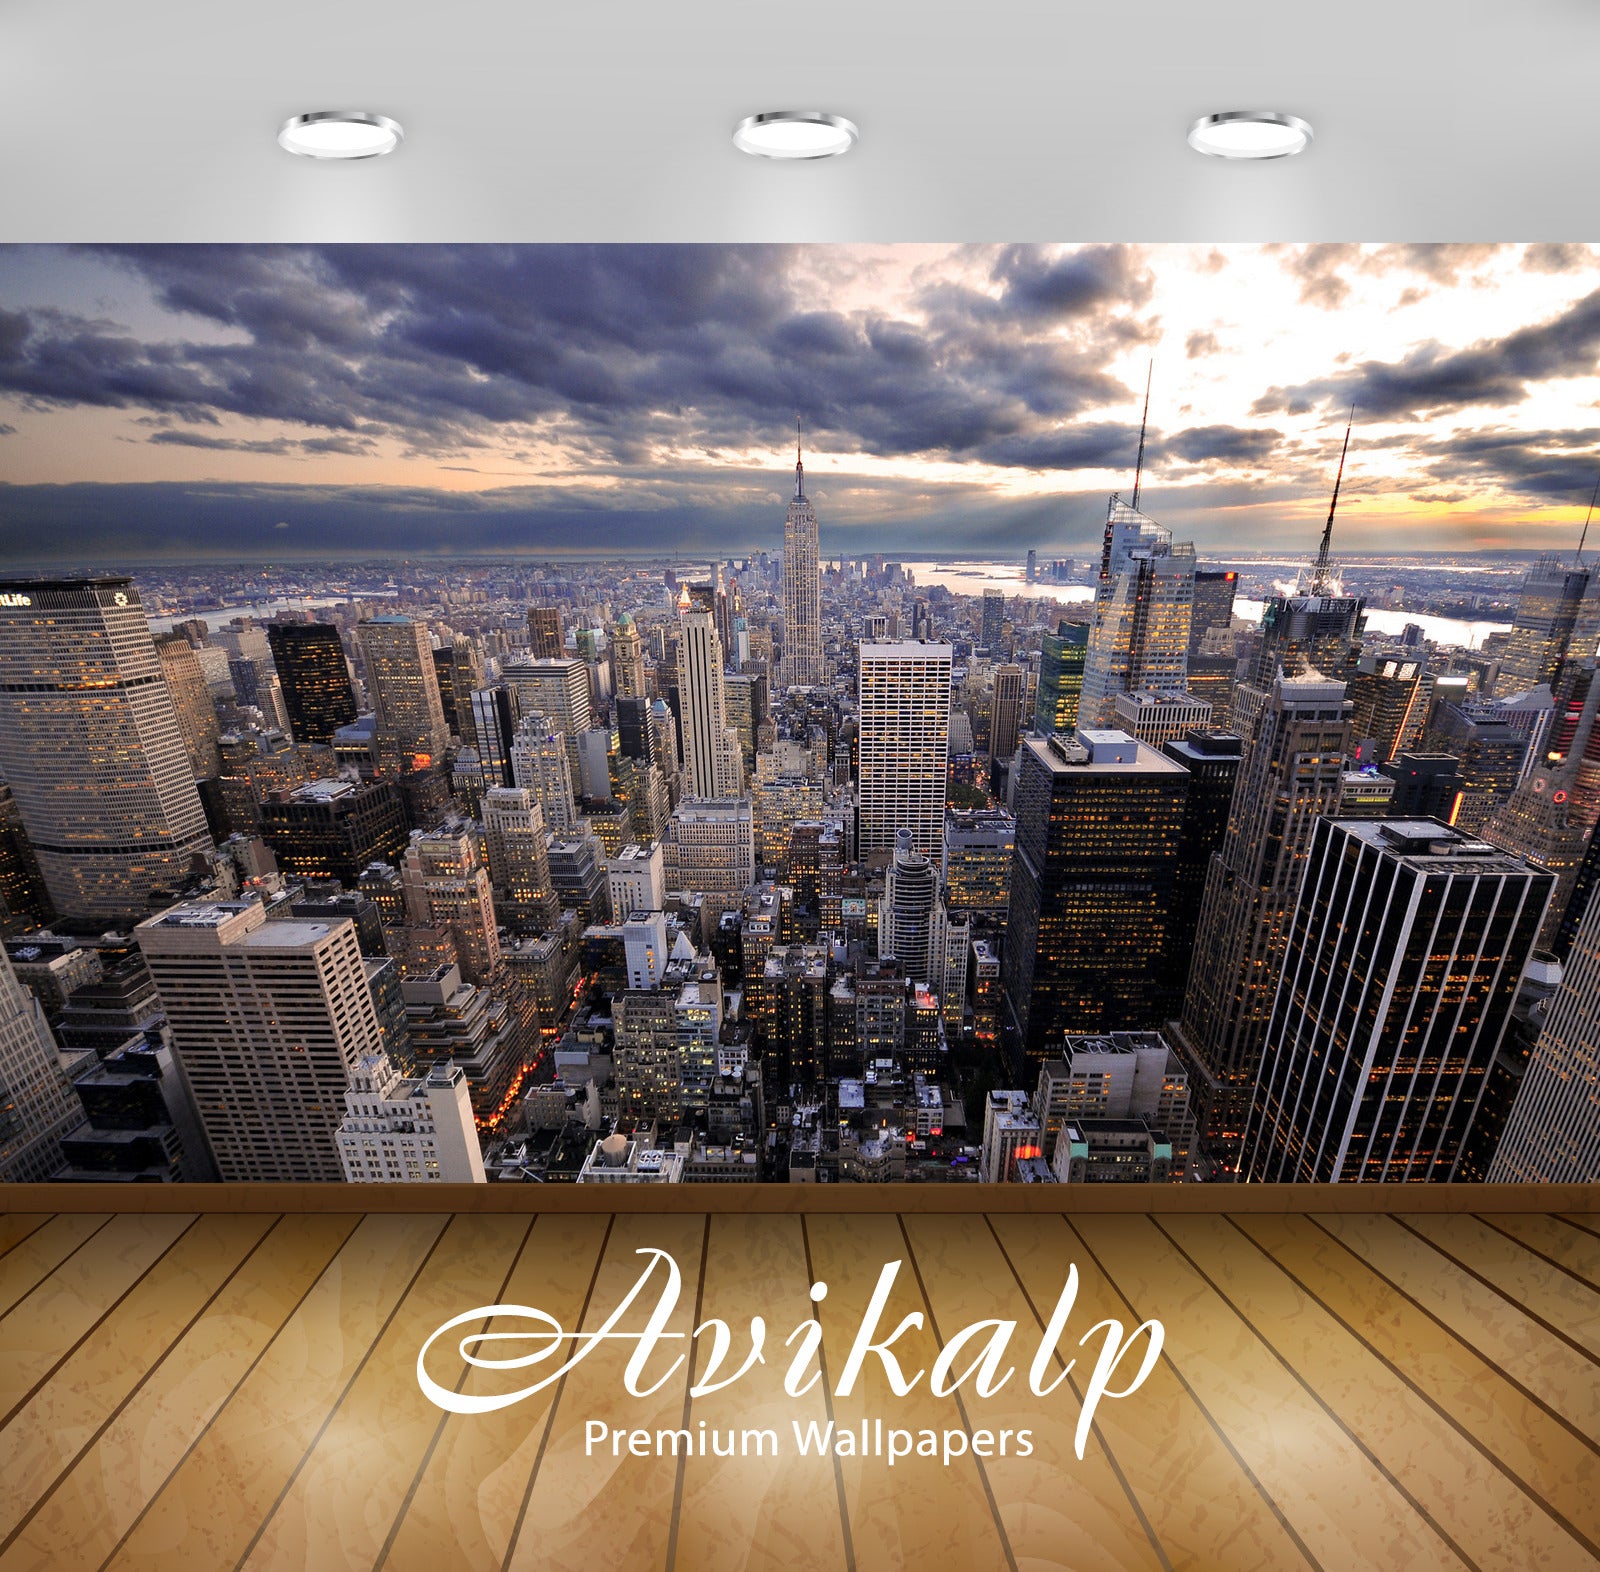 Avikalp Exclusive Awi1393 New York City Full HD Wallpapers for Living room, Hall, Kids Room, Kitchen